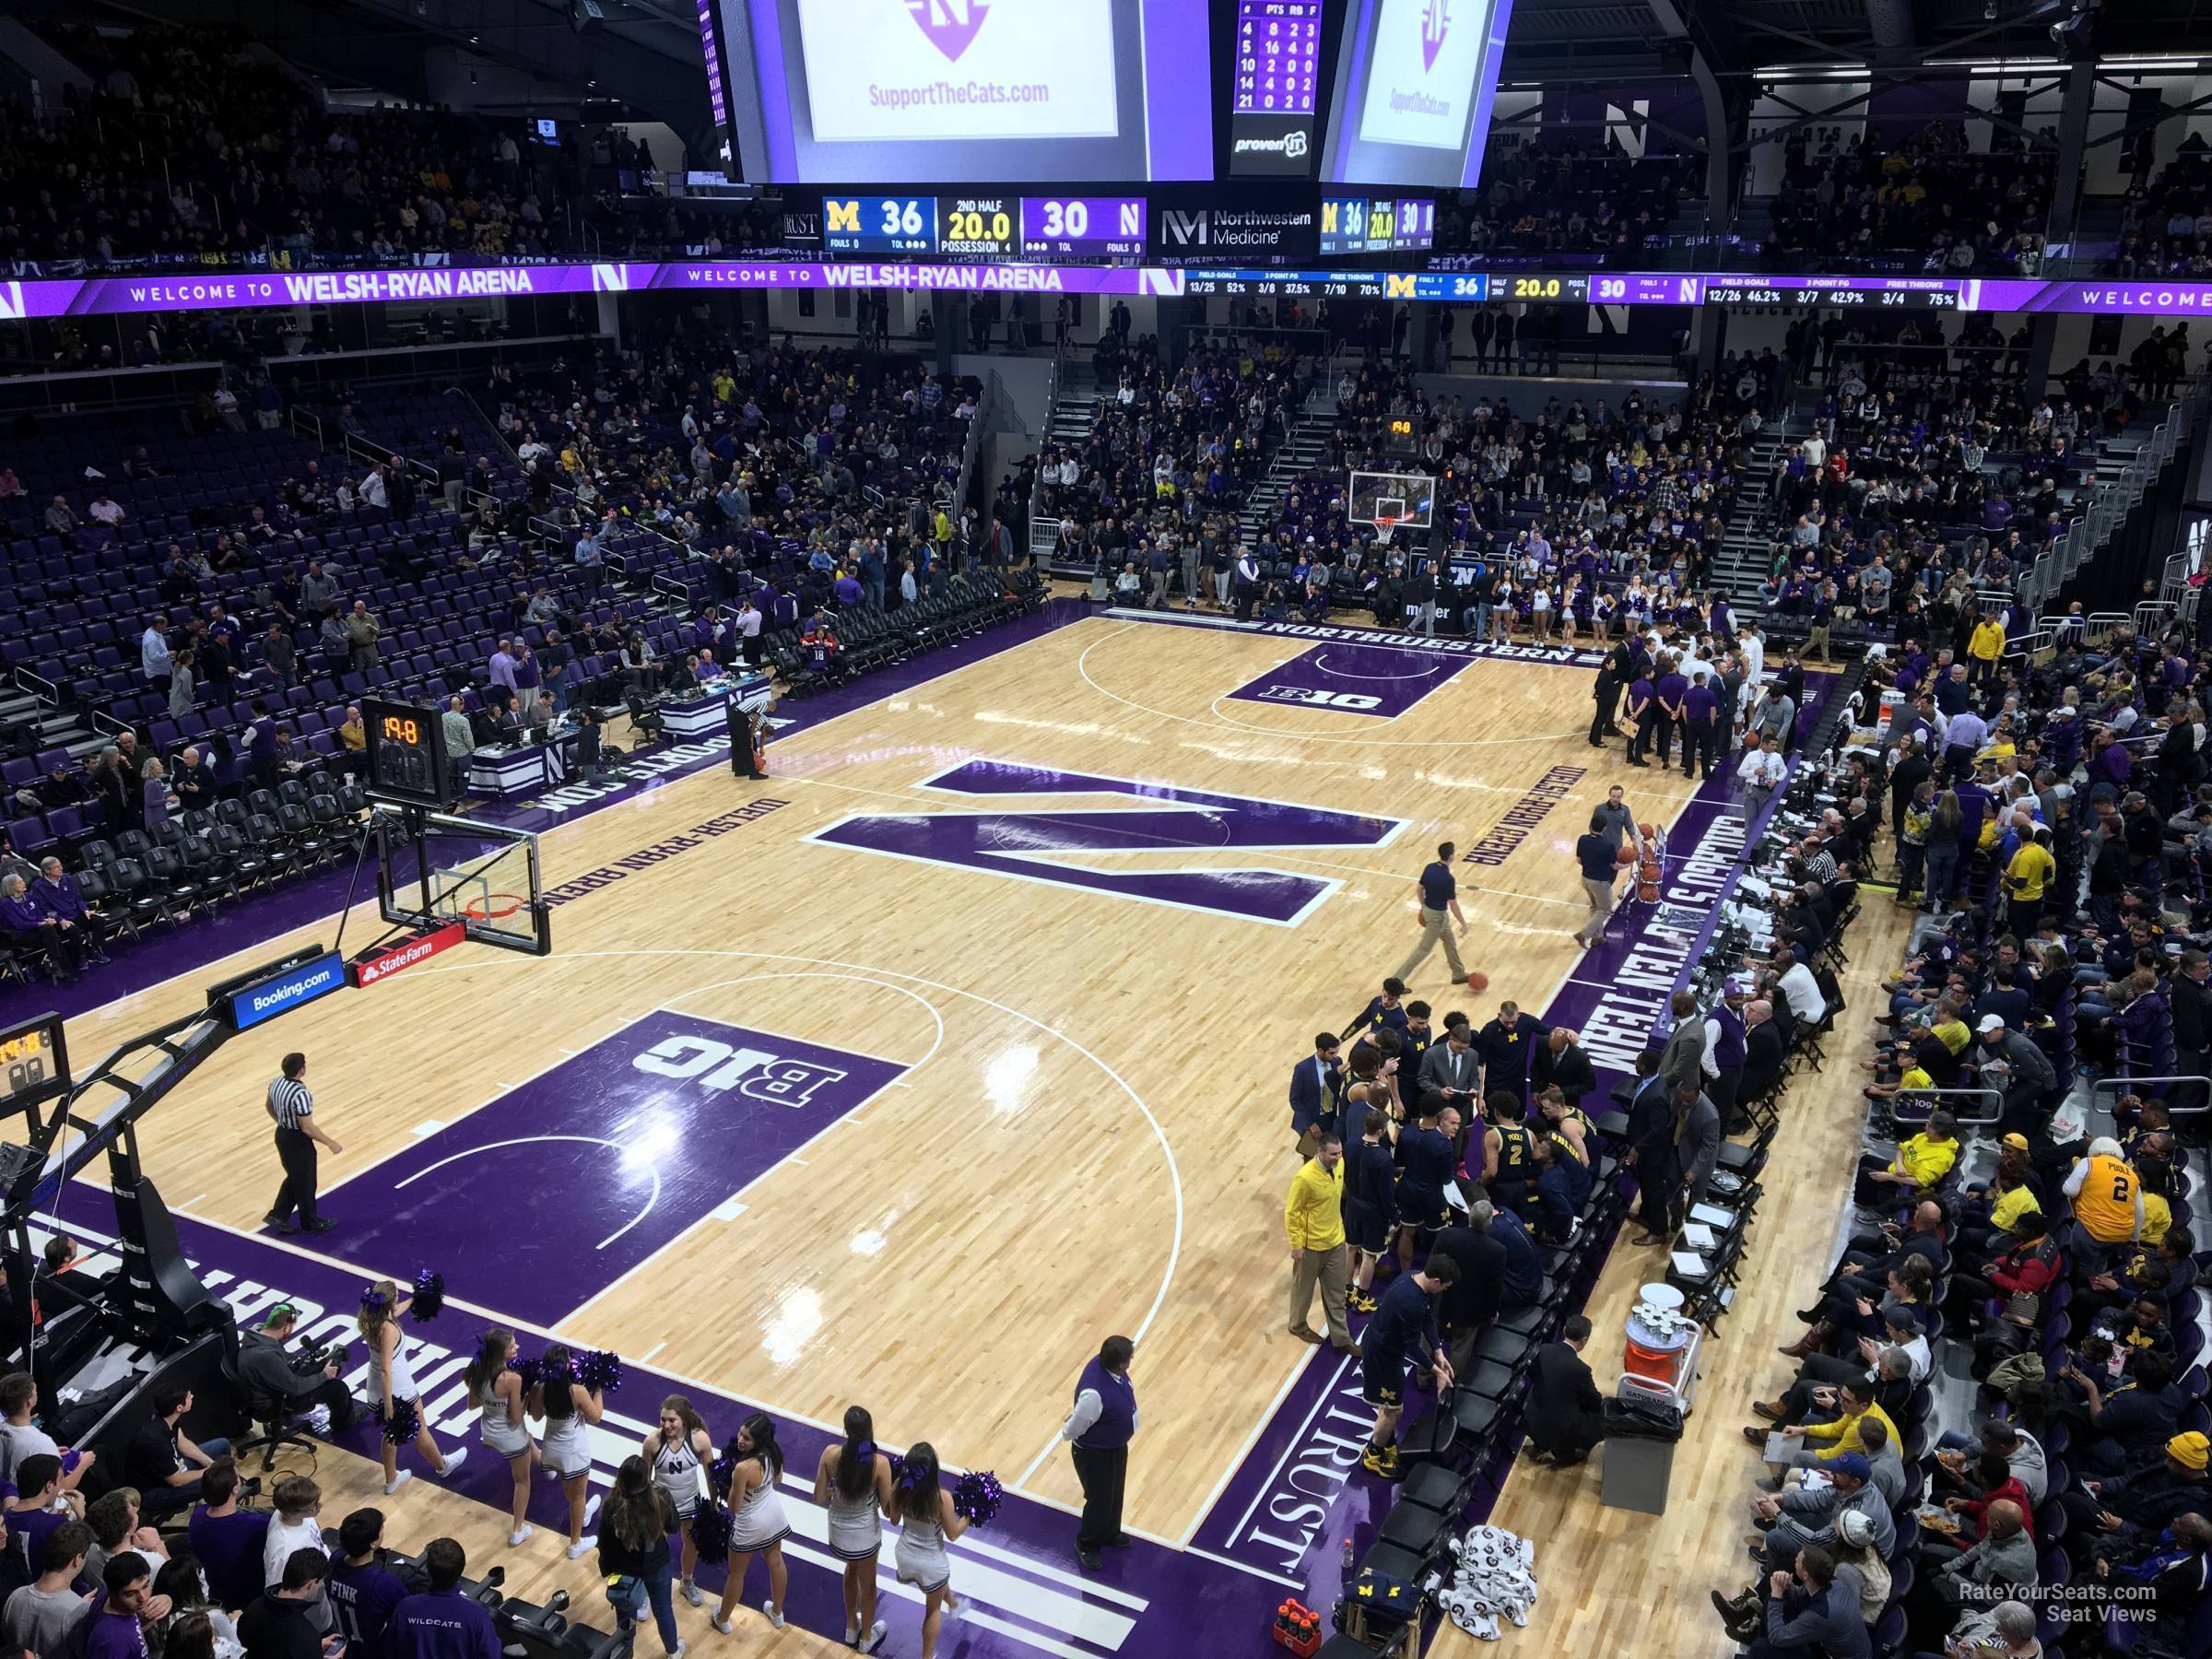 section 212, row 1 seat view  - welsh-ryan arena